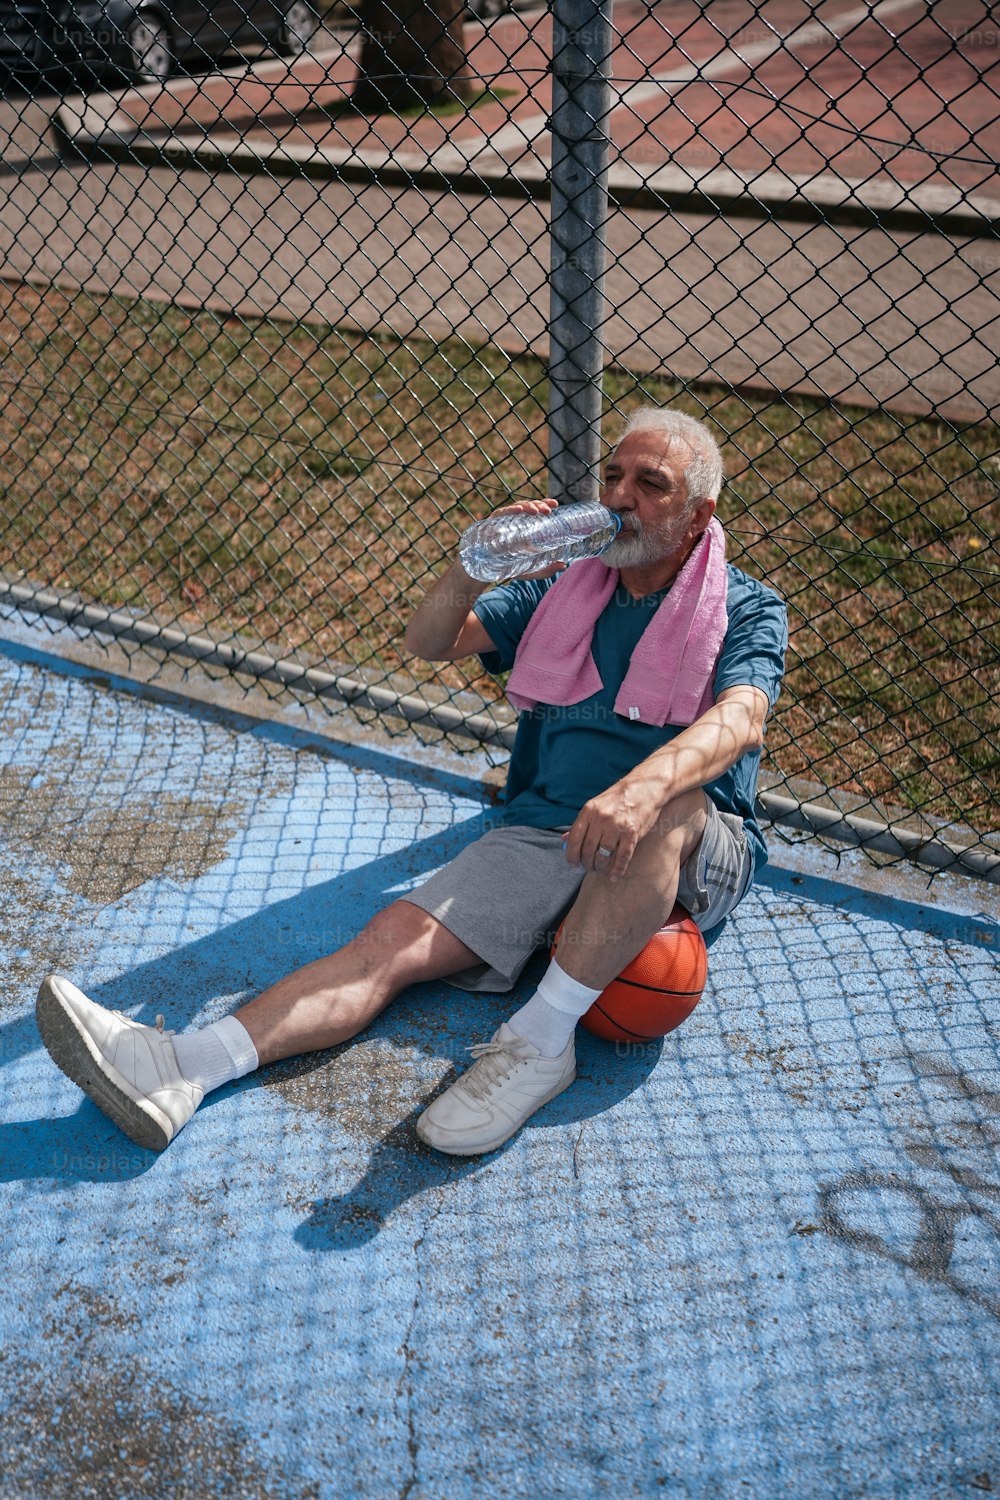 a man sitting on the ground with a tennis racket in his hand